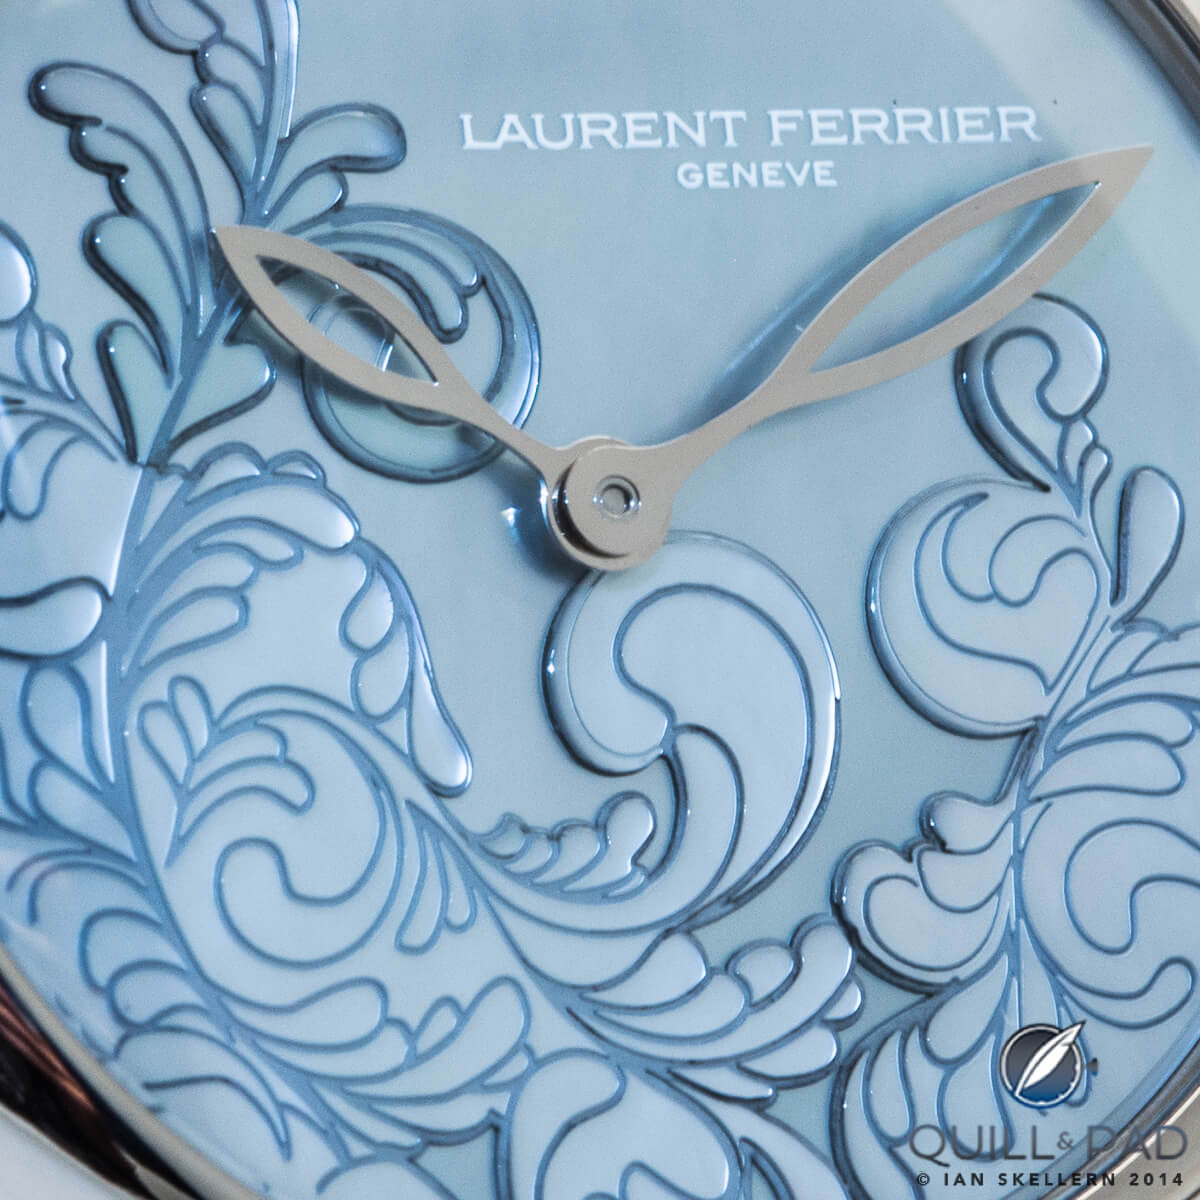 The exquisitely engraved mother-of-pearl dial of Lady F by Laurent Ferrier